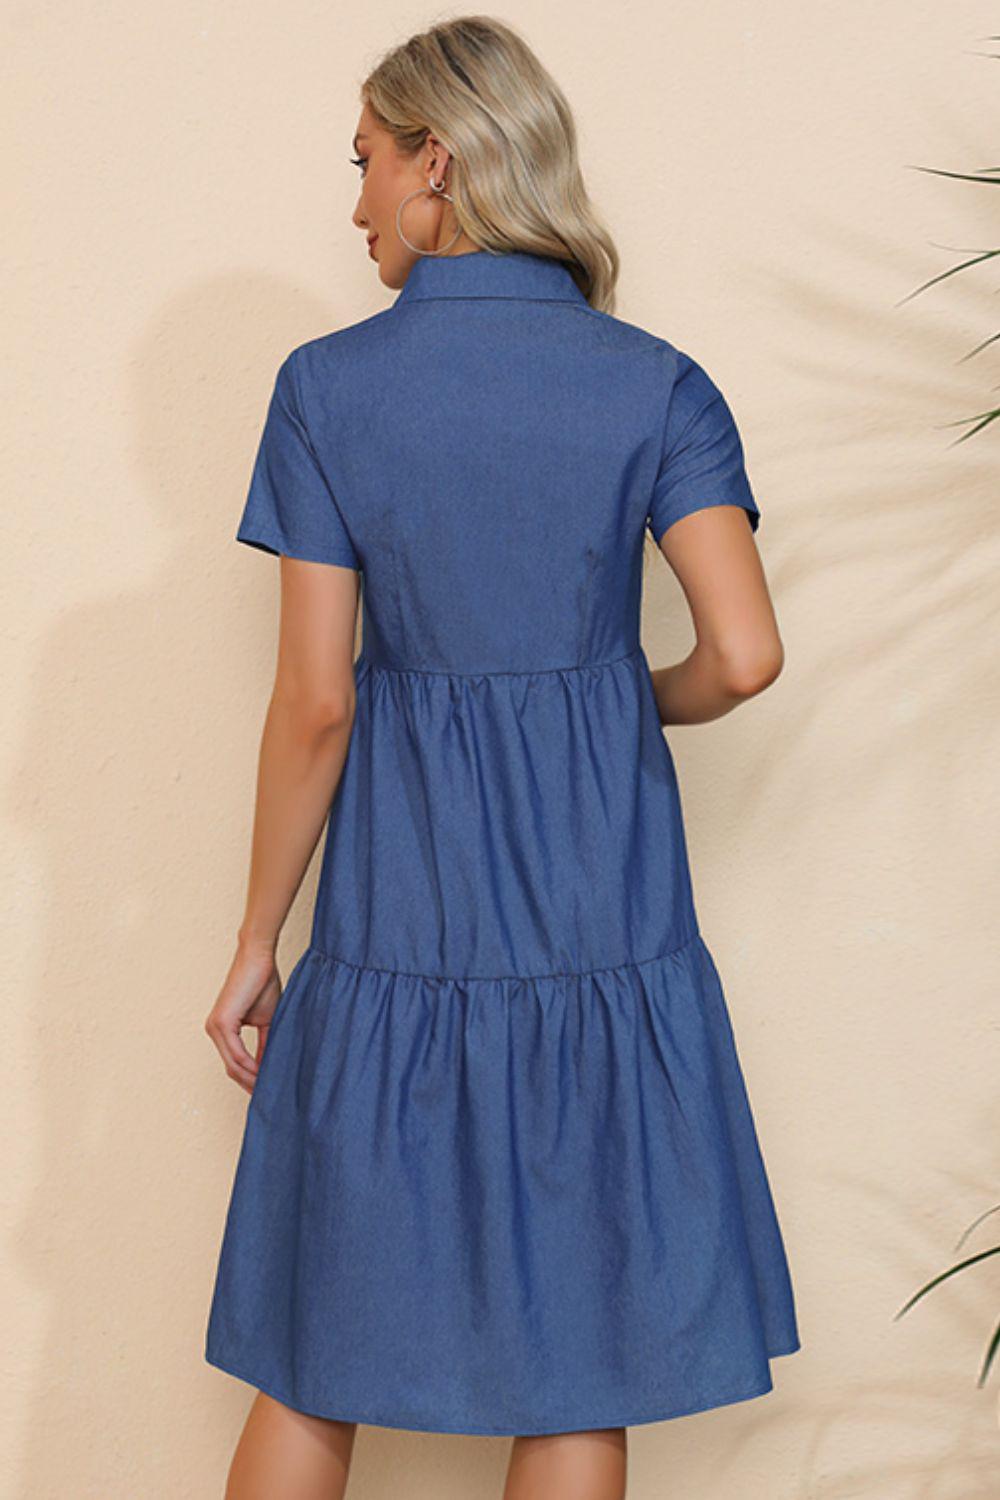 WBS Short Sleeve Collared Button Down Denim Dress-Will be shipped collection-Peacock Blue-S-[option4]-[option5]-[option6]-Womens-USA-Clothing-Boutique-Shop-Online-Clothes Minded